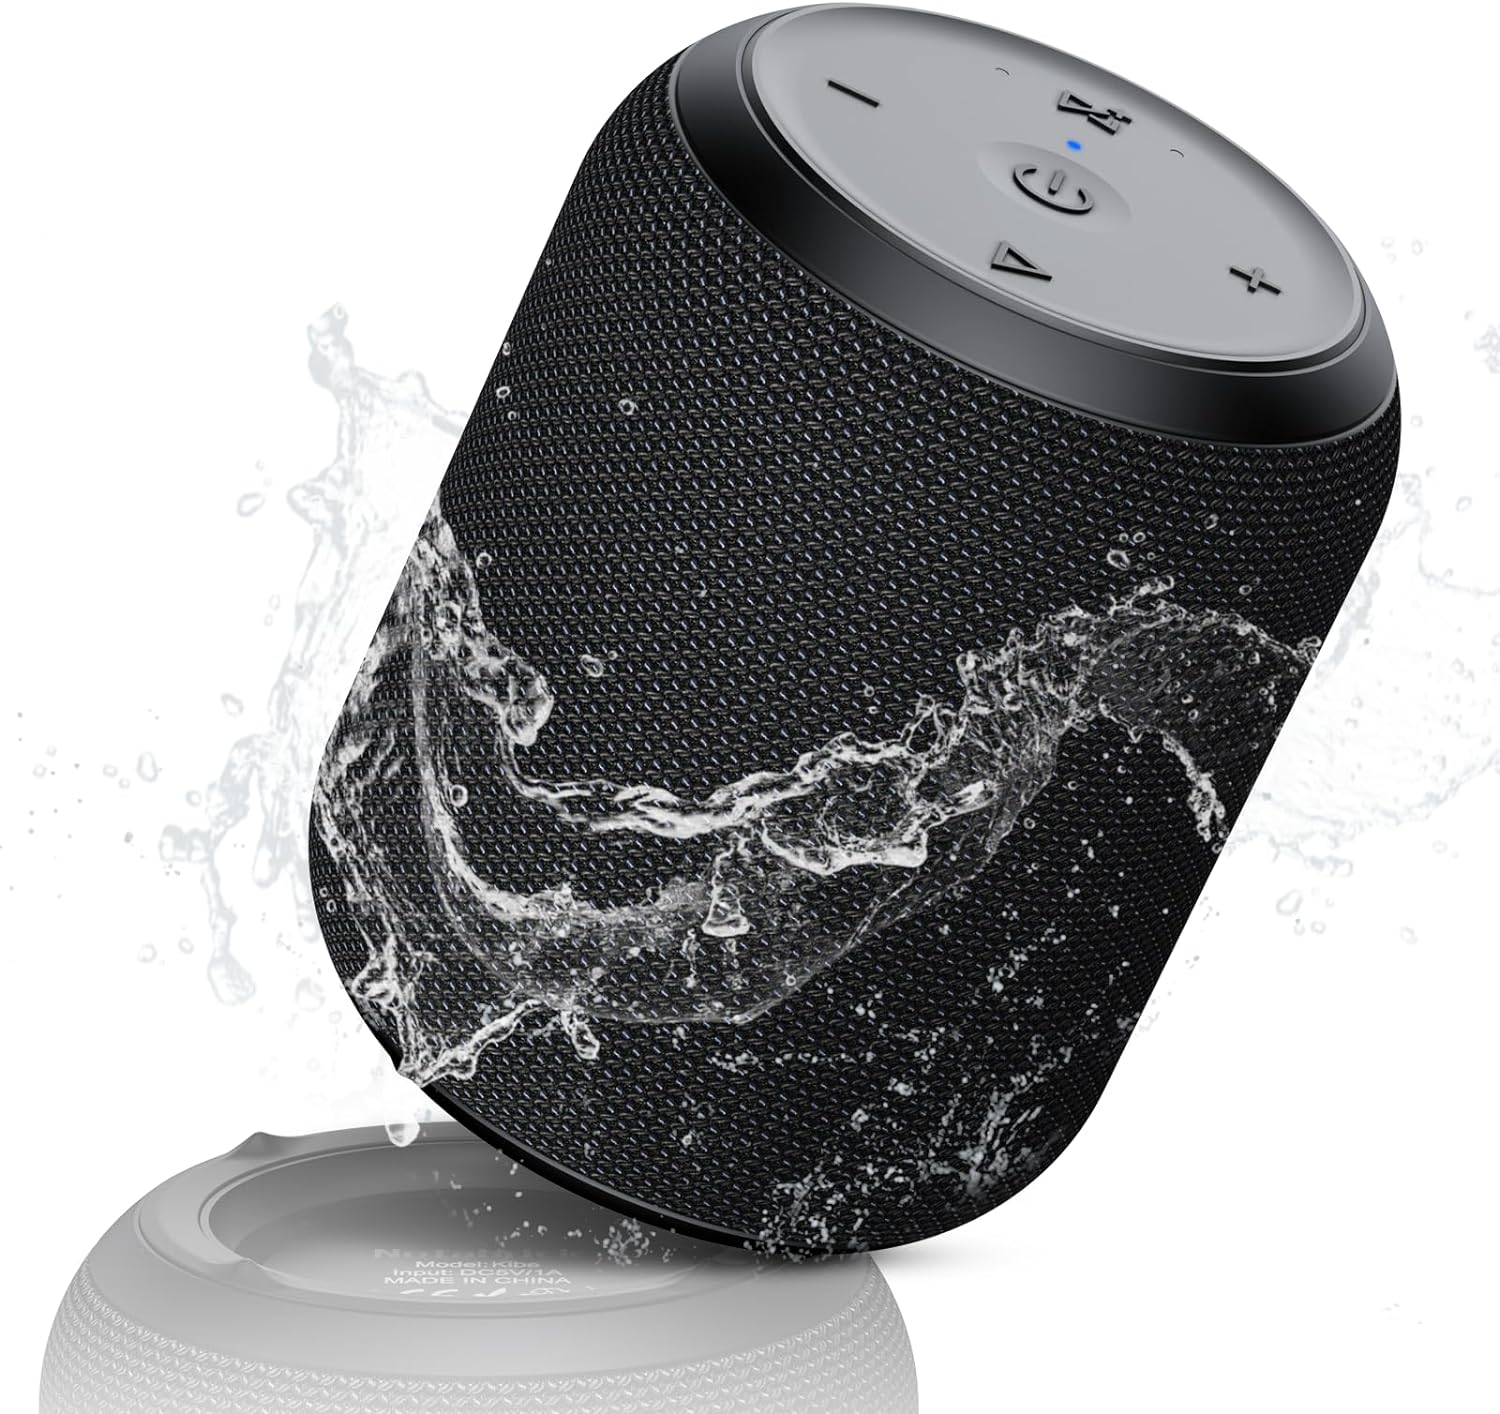 NOTABRICK Bluetooth Speaker, Portable Wireless with 15W Stereo Sound, Active Extra Bass, IPX6 Waterproof Shower Speaker, Double Pairing, for Party, Home Theatre, Game Theatre